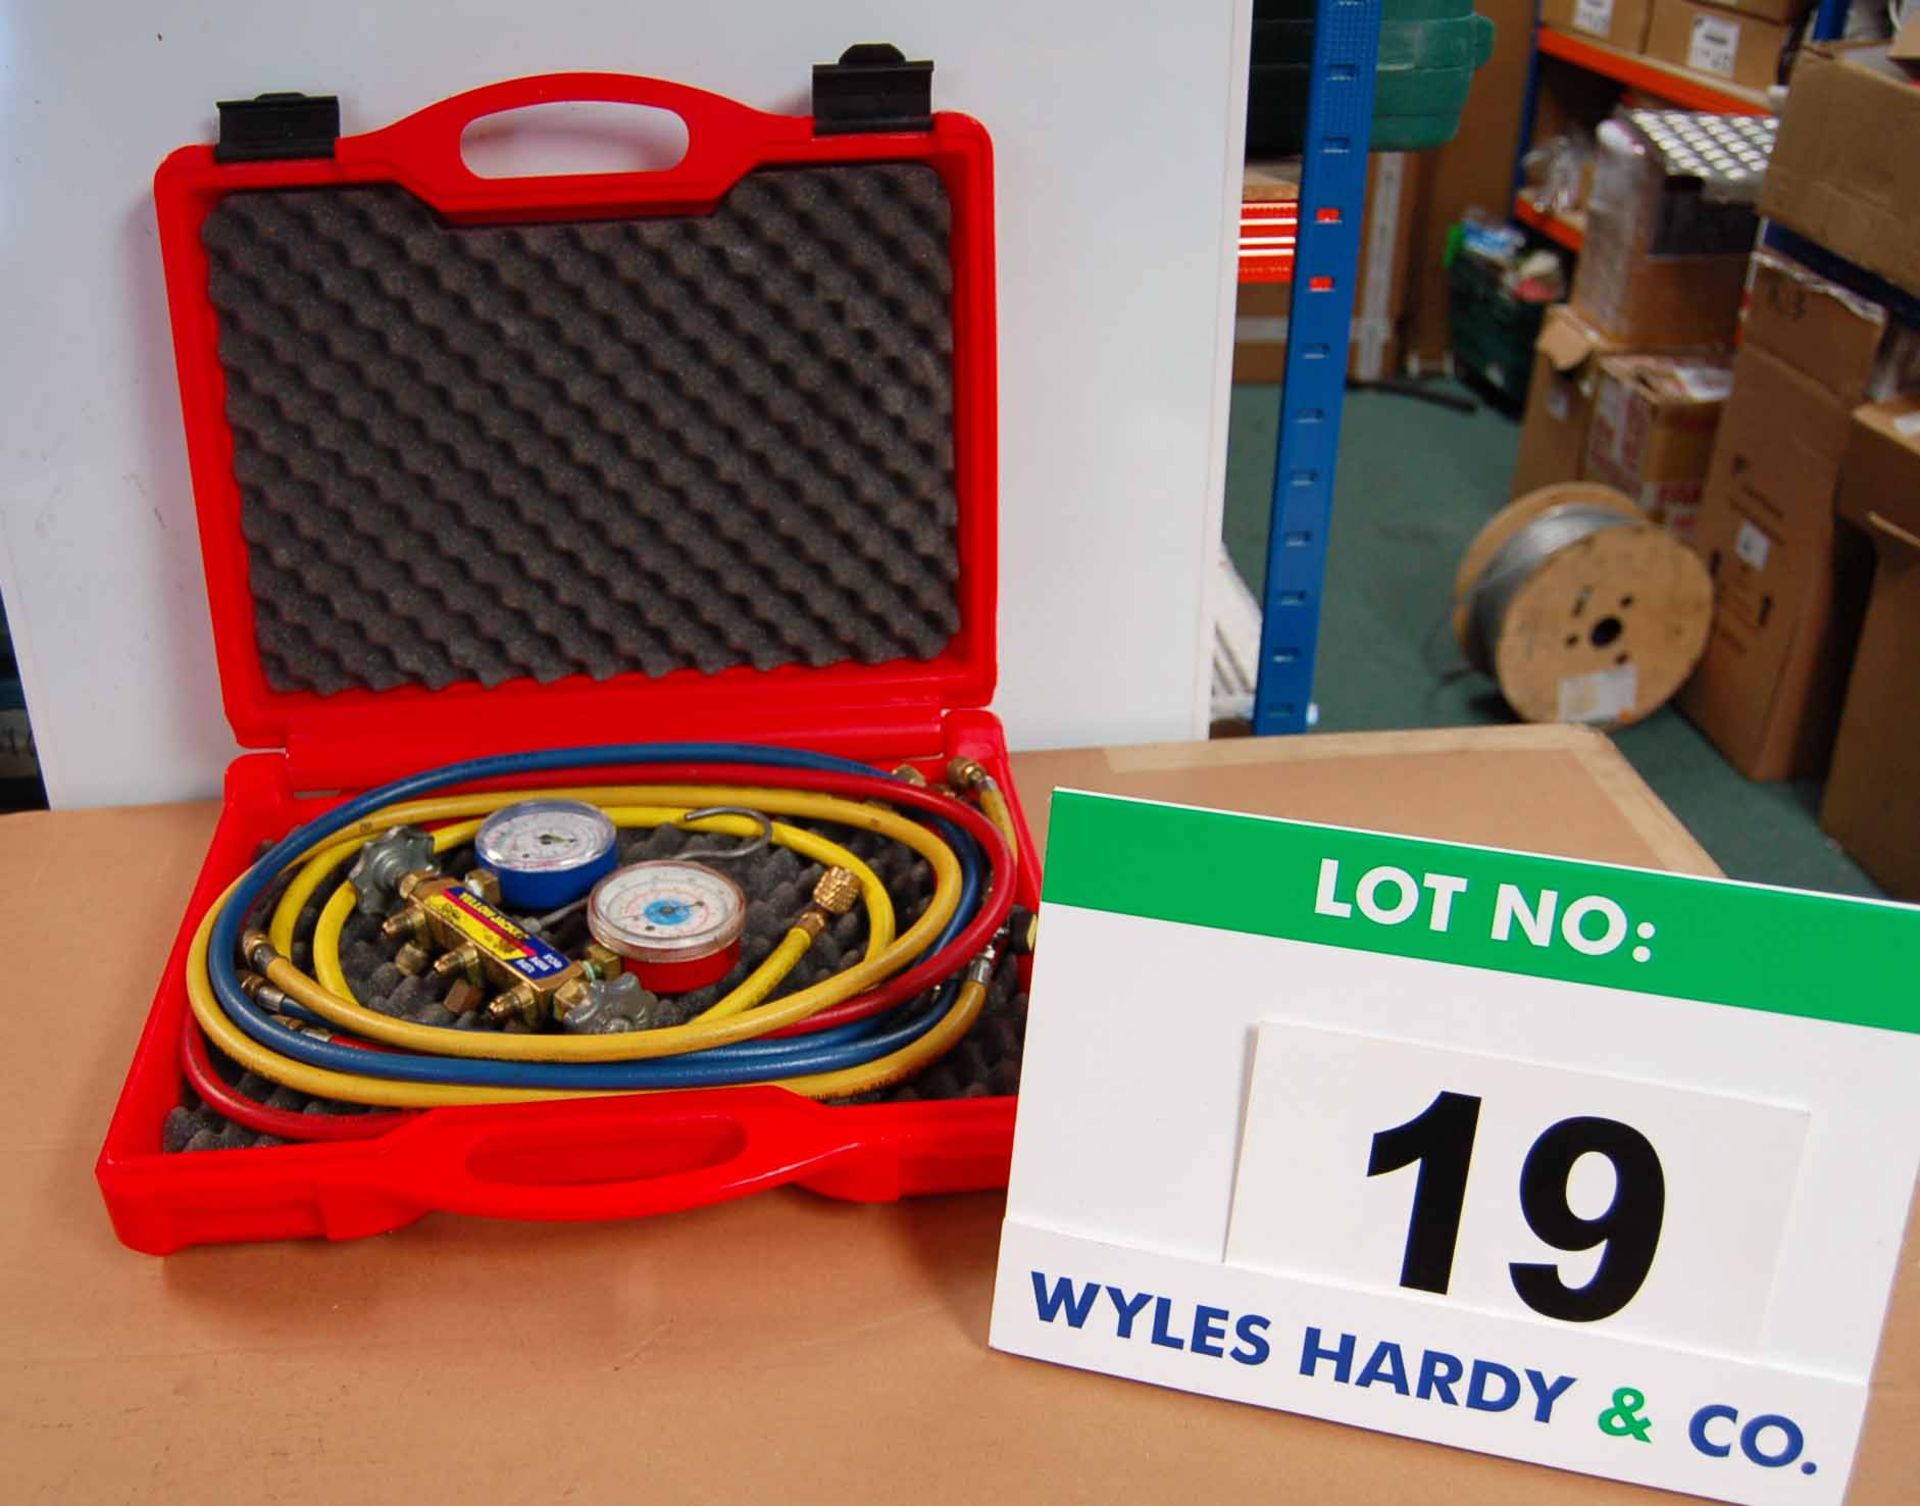 A YELLOW JACKET 4-Valve Manifold Test Kit (As Photographed)